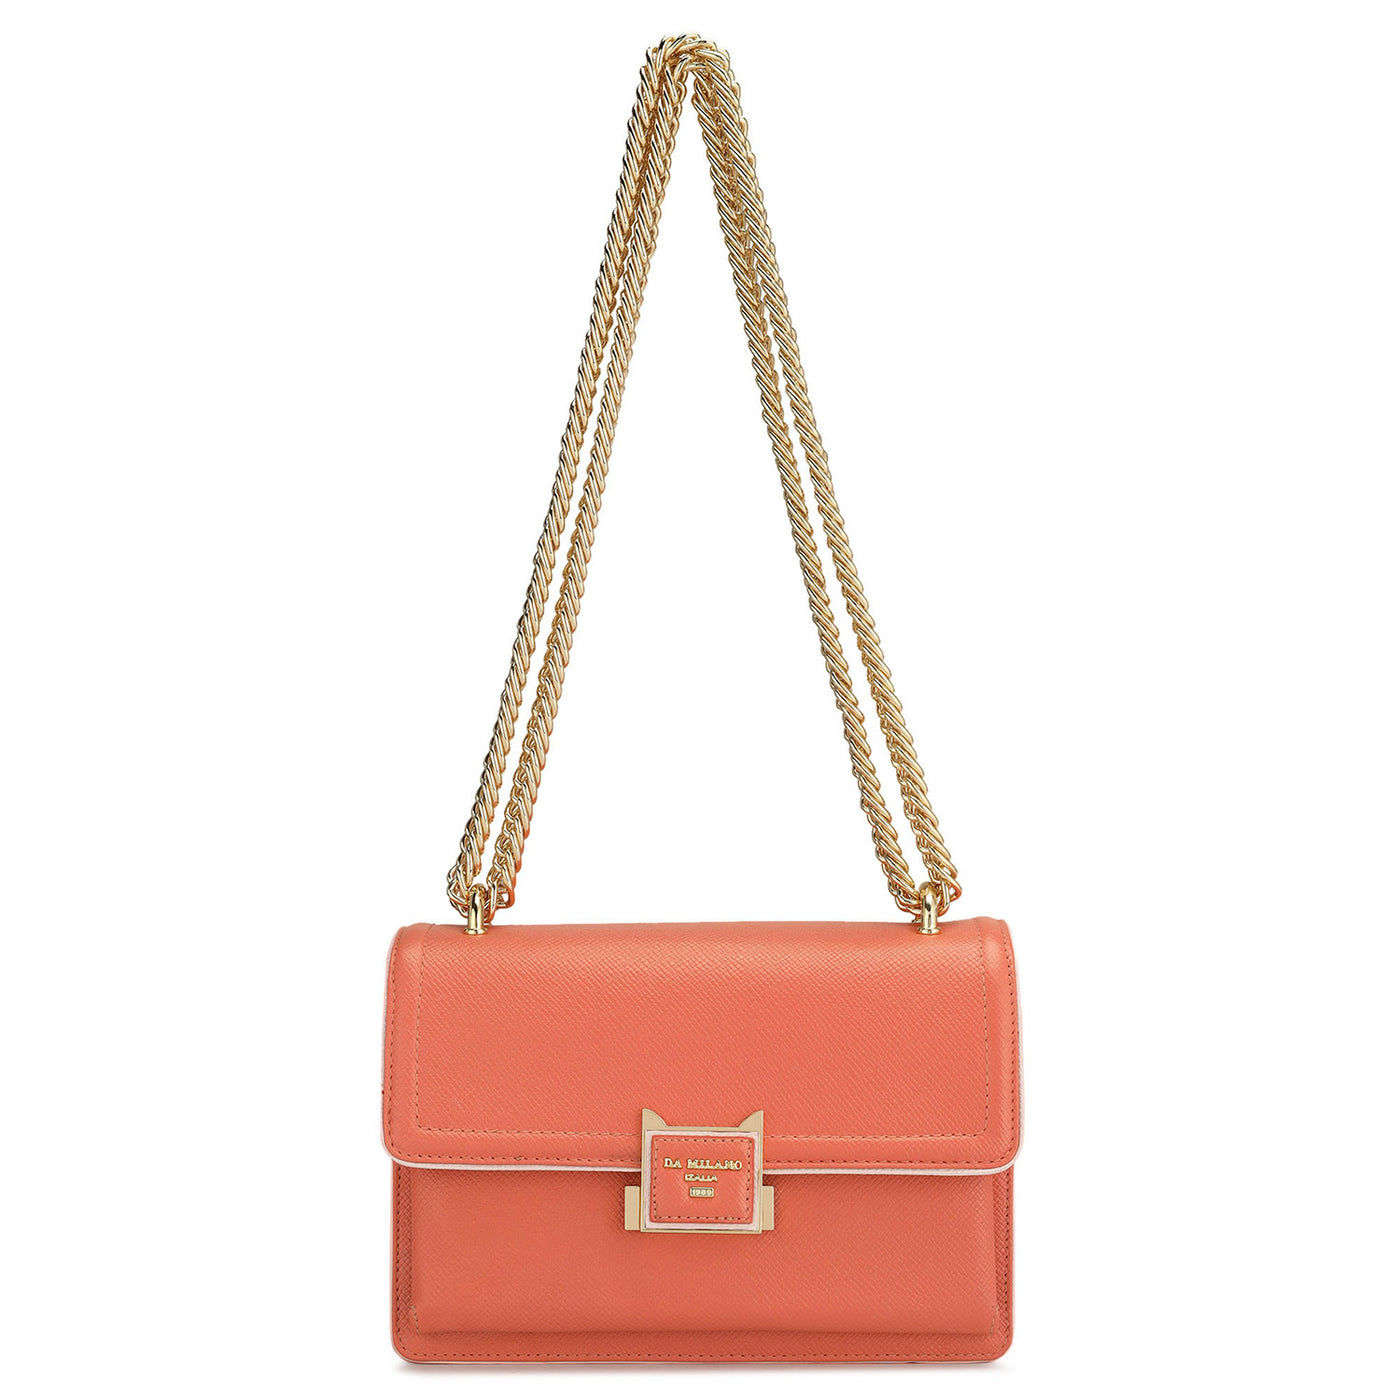 Small Franzy Leather Shoulder Bag - Salmon